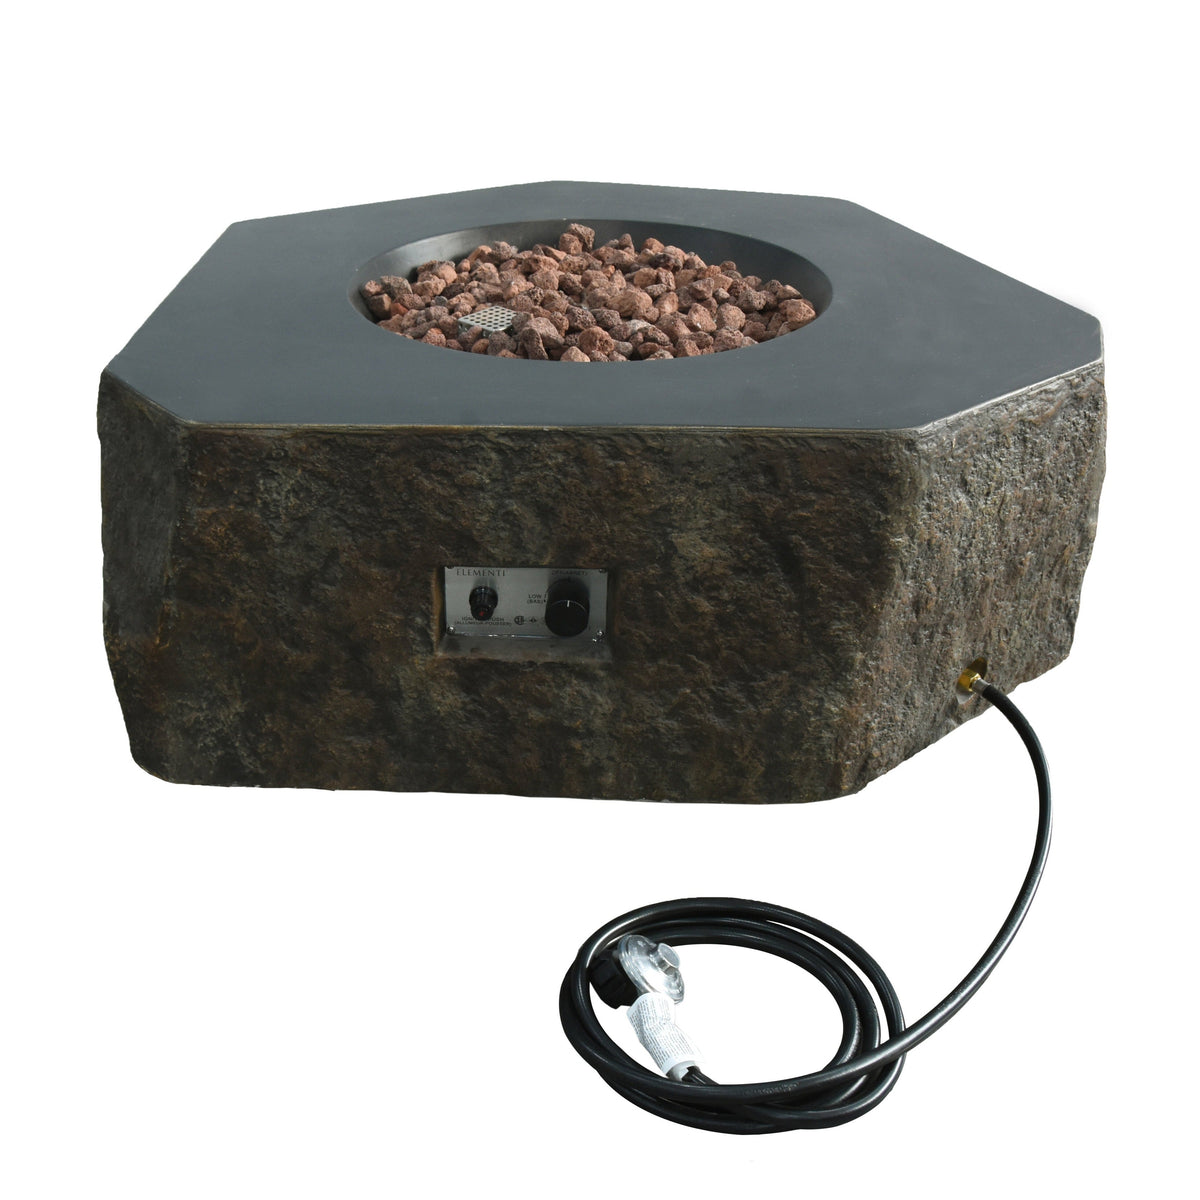 Columbia Fire Pit Table with Hose